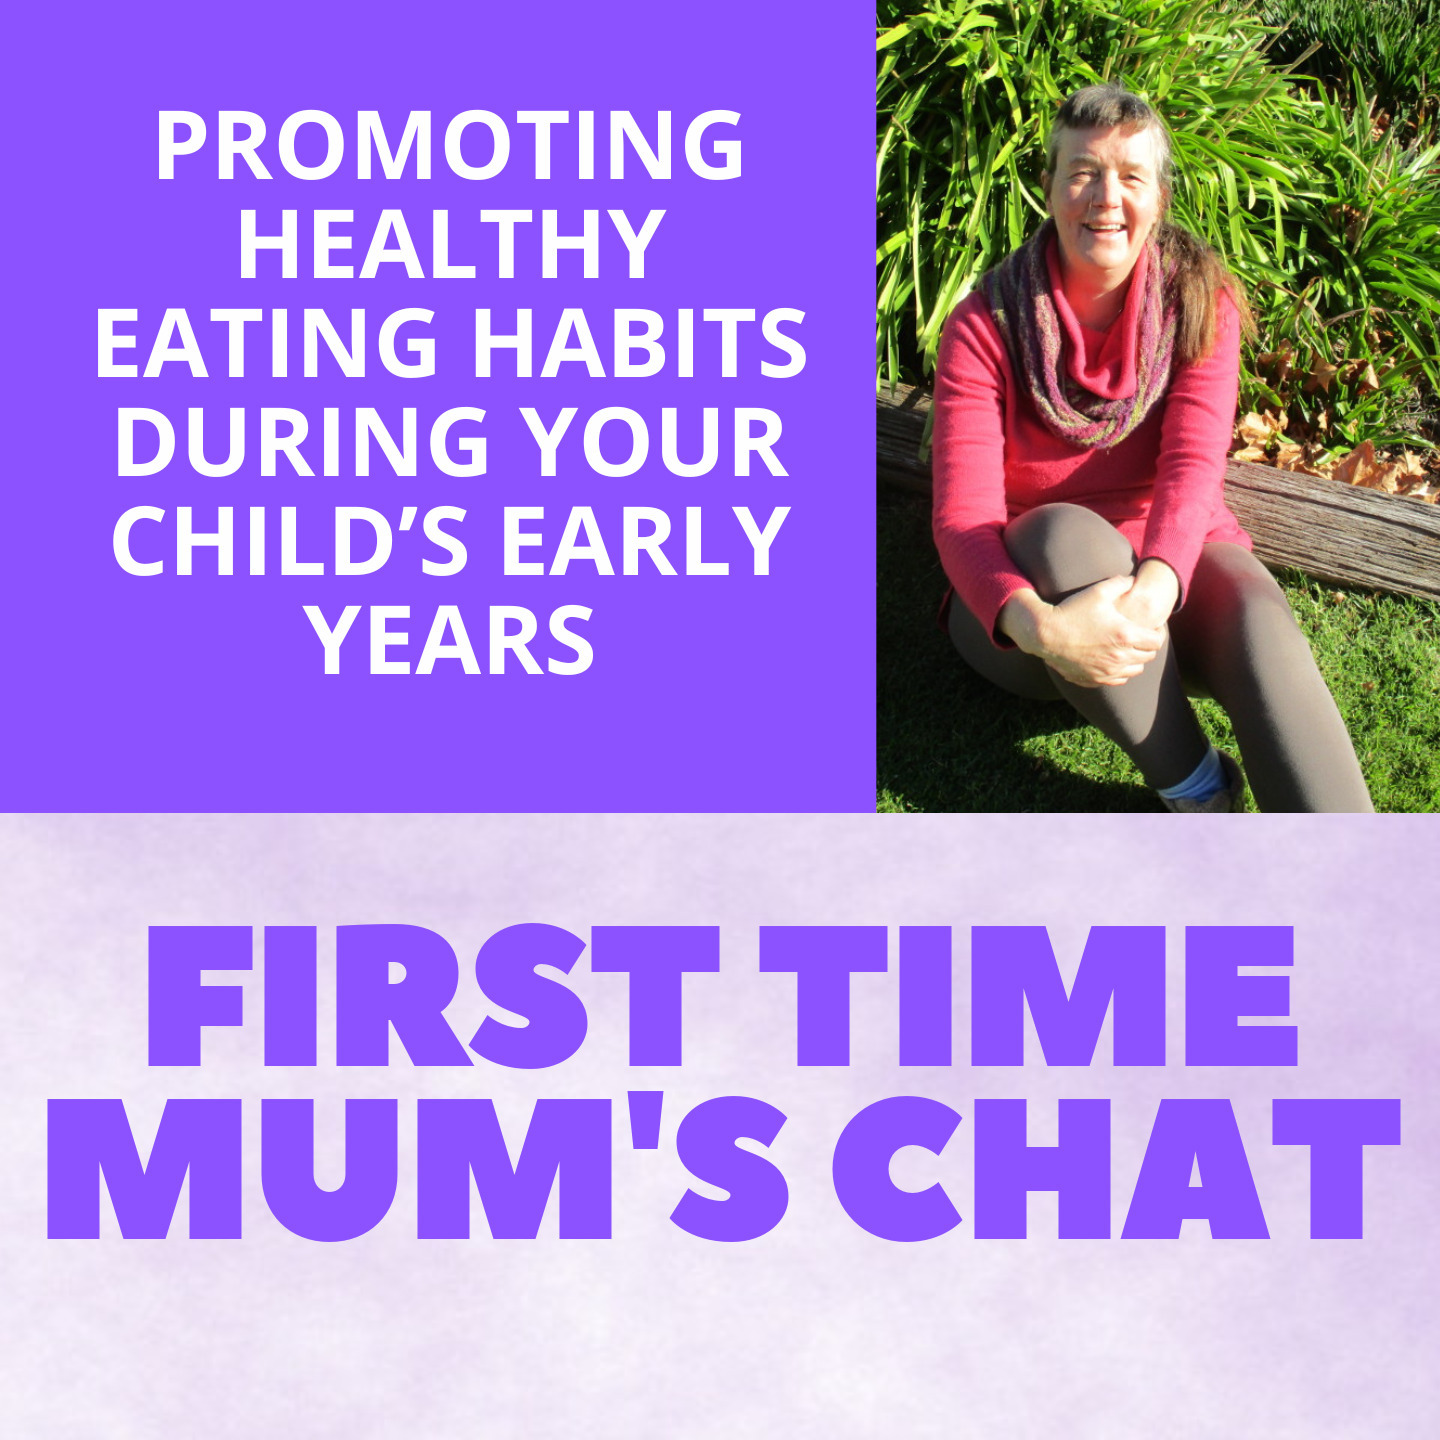 Promoting Healthy Eating Habits During Your Child’s Early Years